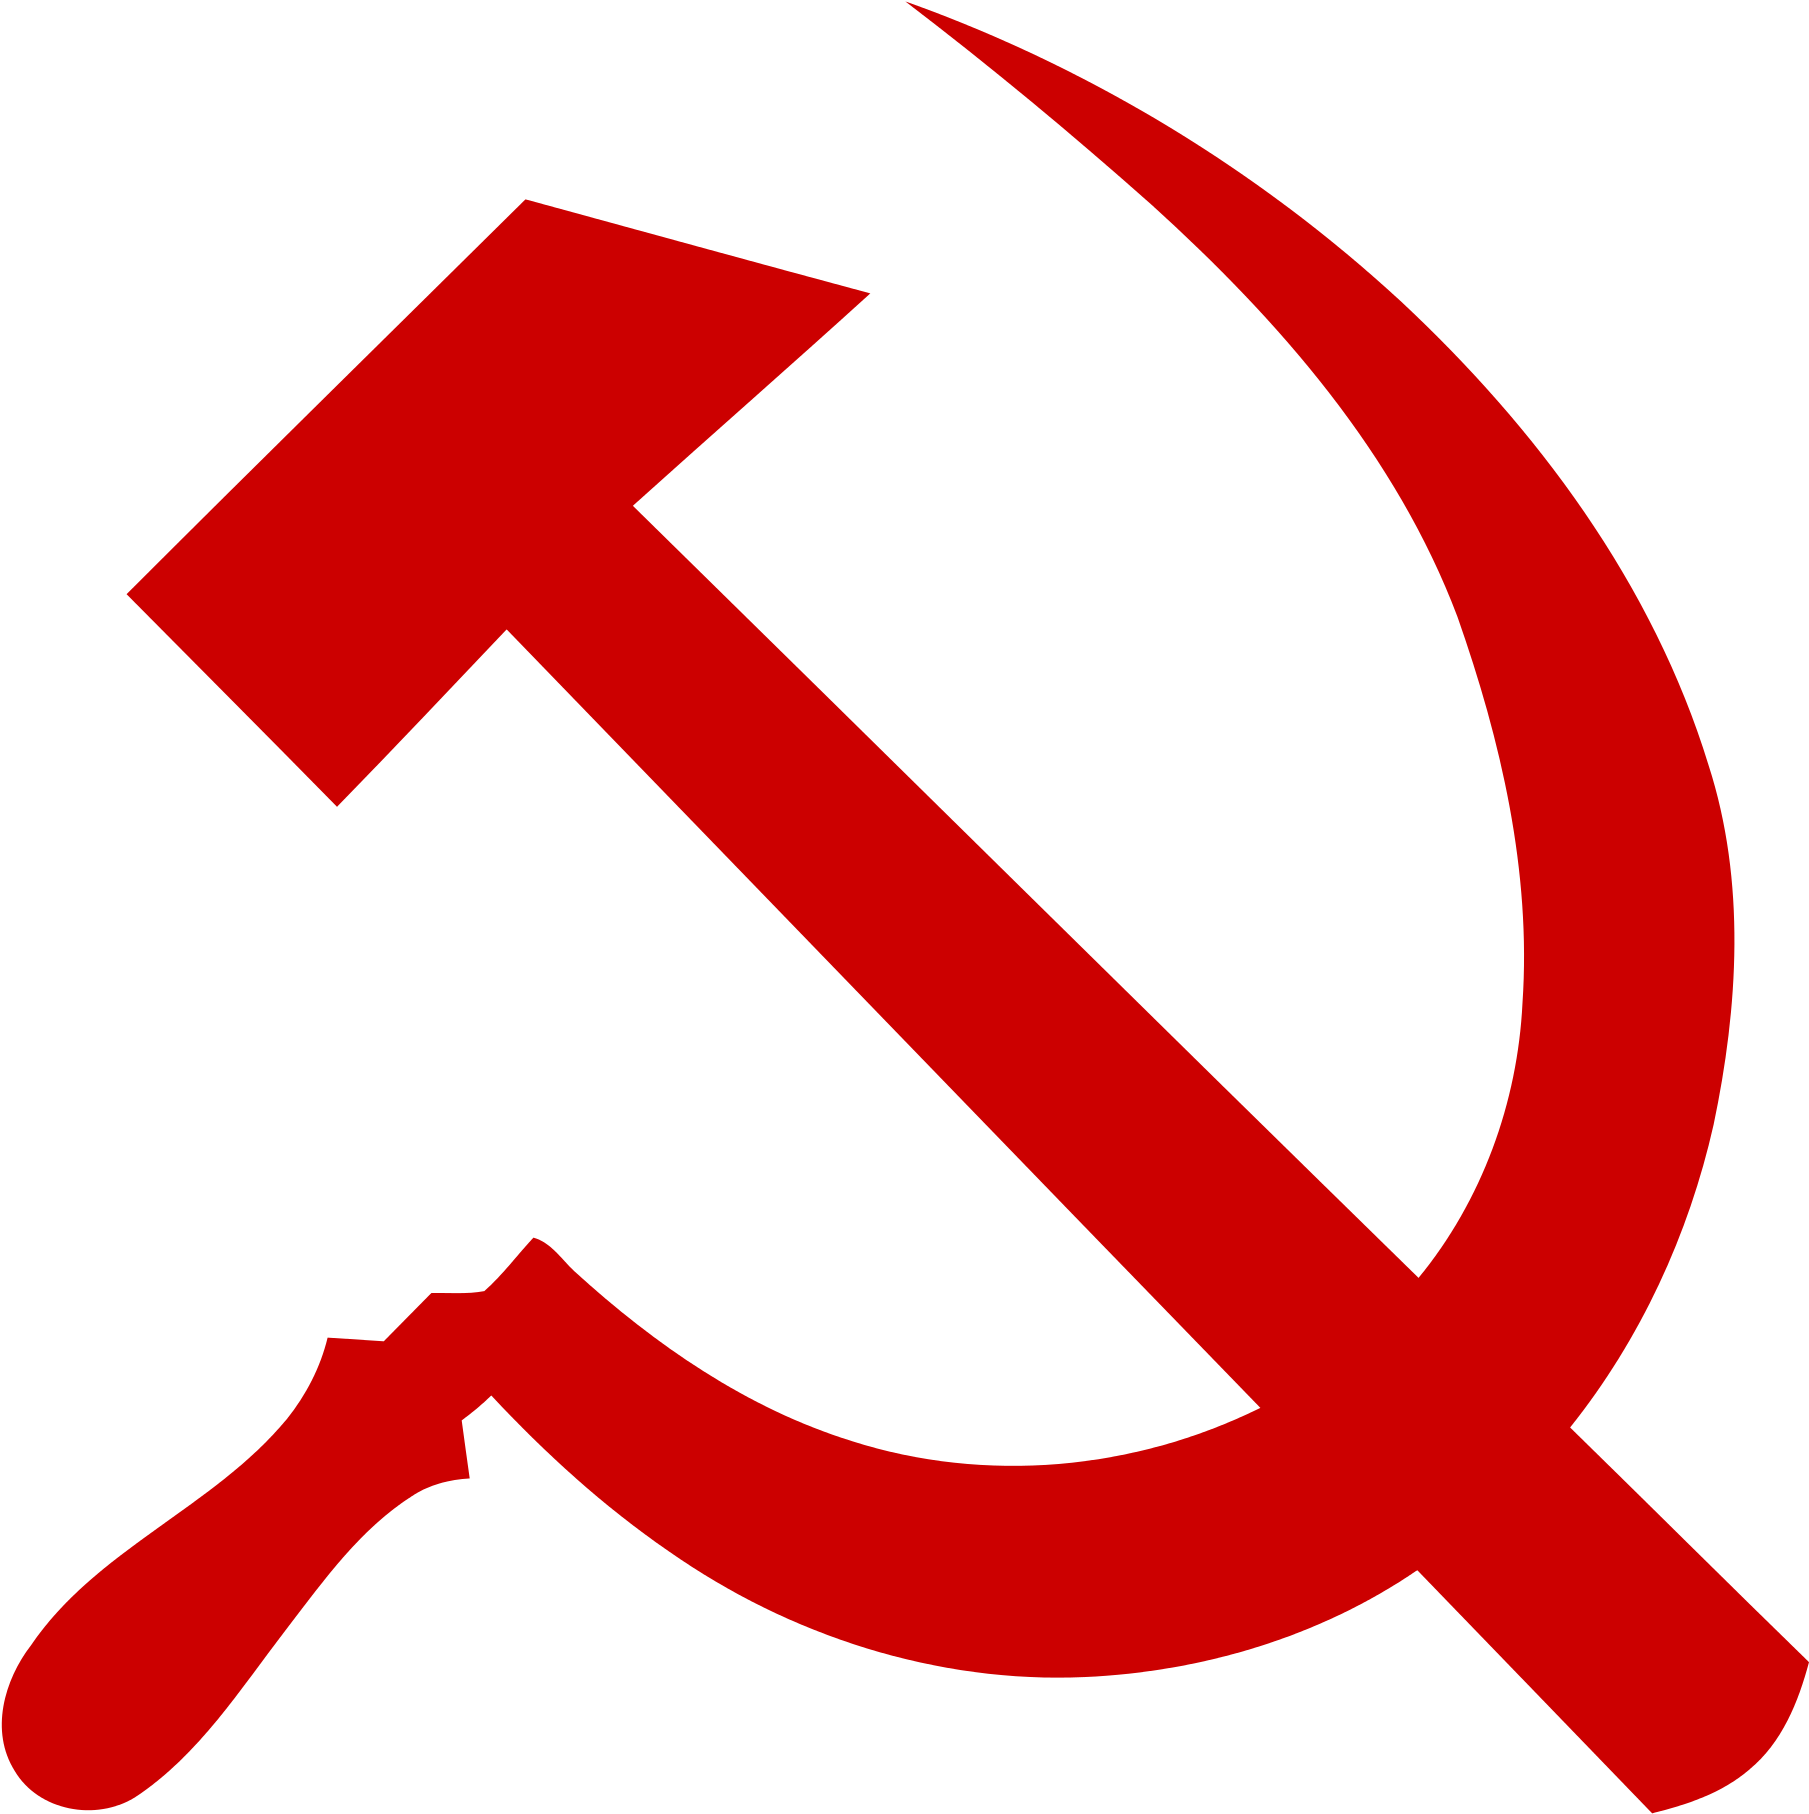 Russian Hammer And Sickle 255773 - Communist Party Of Chile (2000x2000)